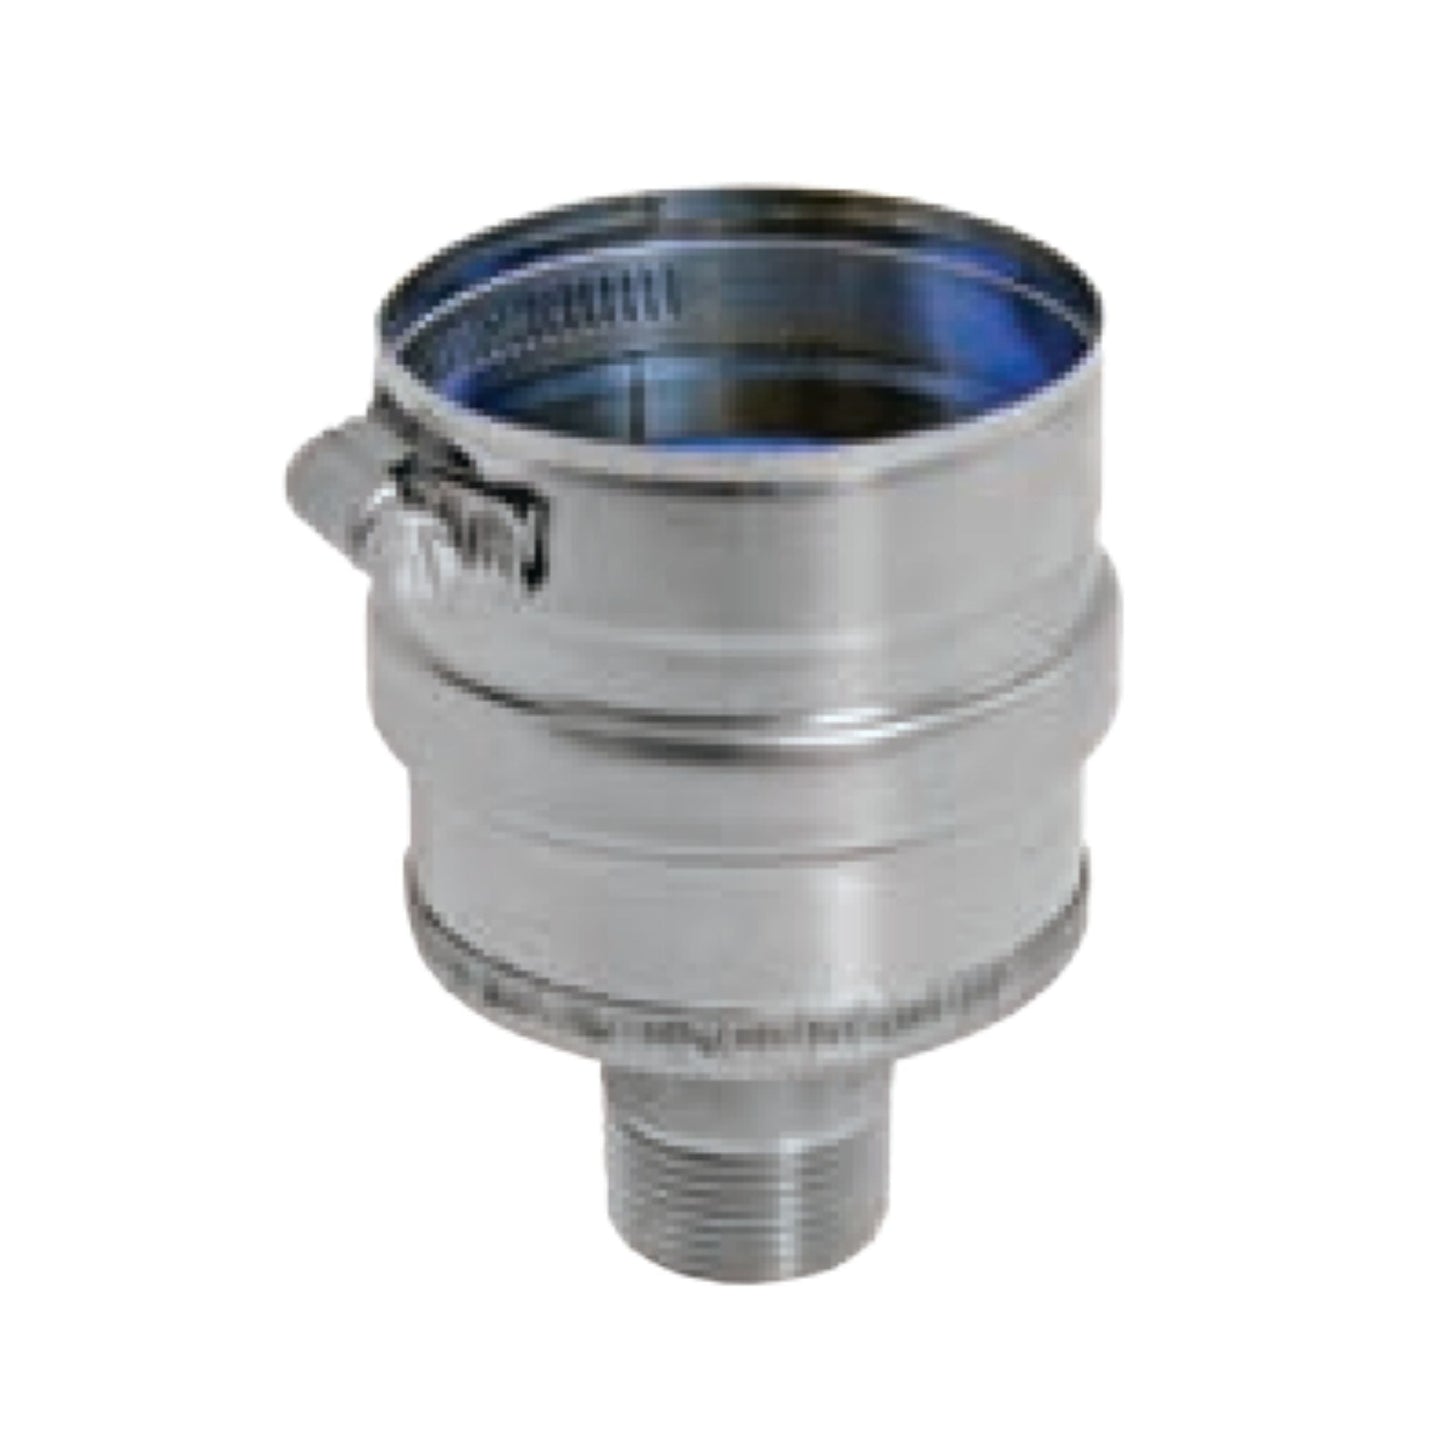 DuraVent FasNSeal 3" 29-4C Stainless Steel IPS Drain Fitting